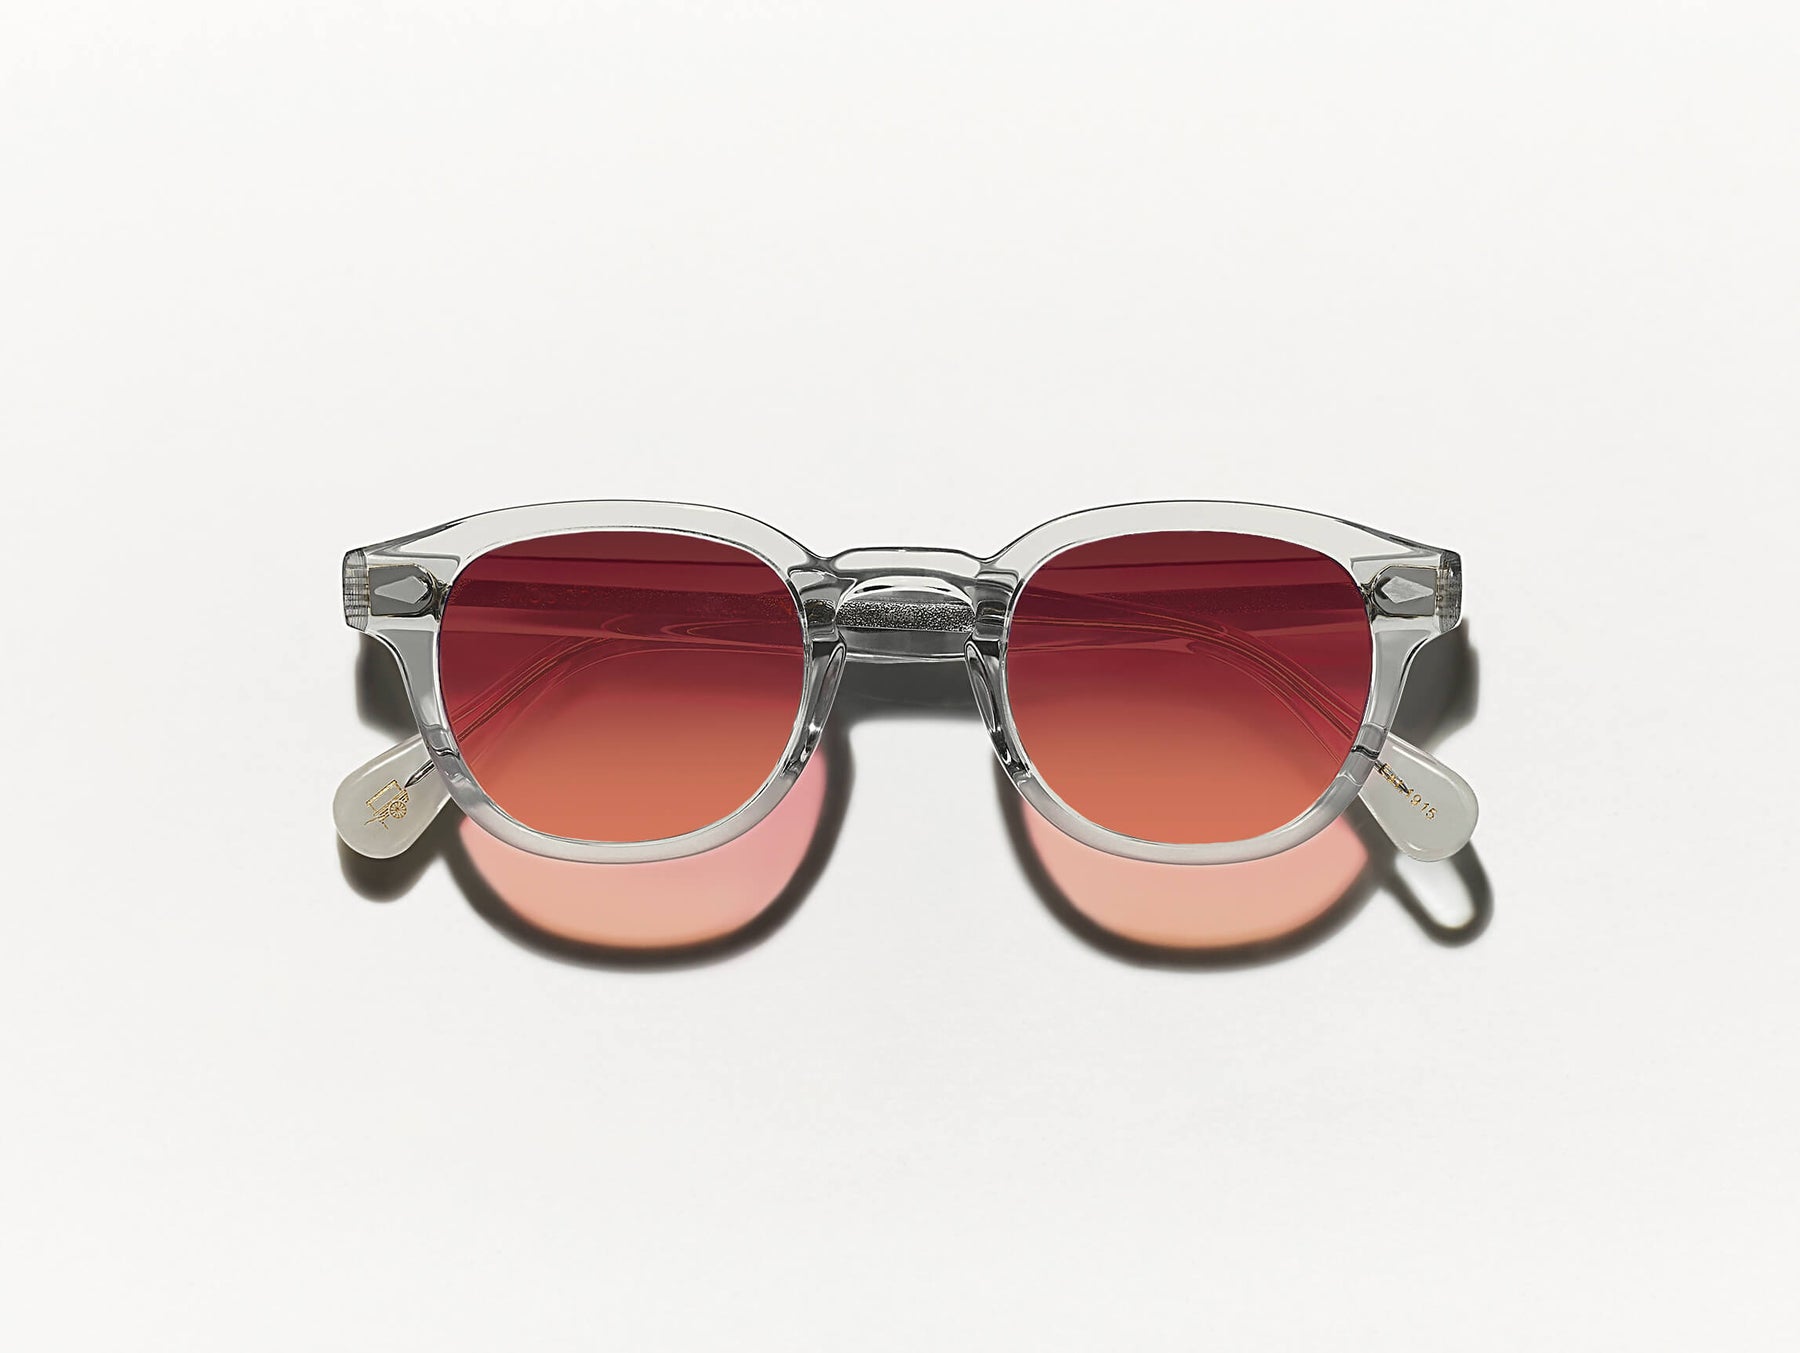 The LEMTOSH Light Grey with Cabernet Tinted Lenses